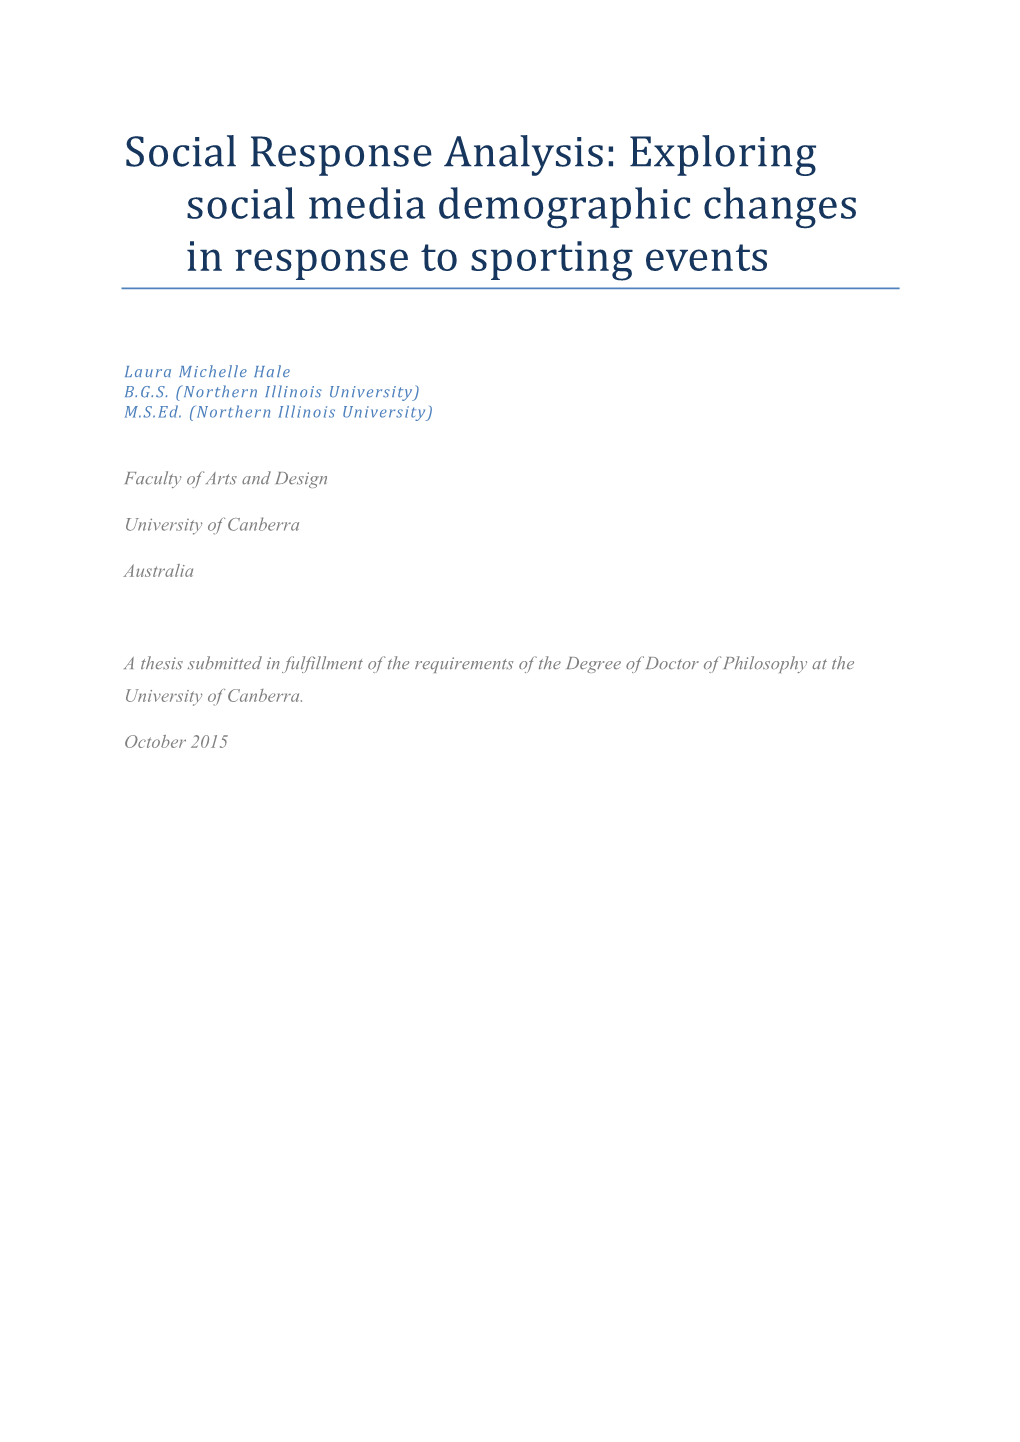 Exploring Social Media Demographic Changes in Response to Sporting Events